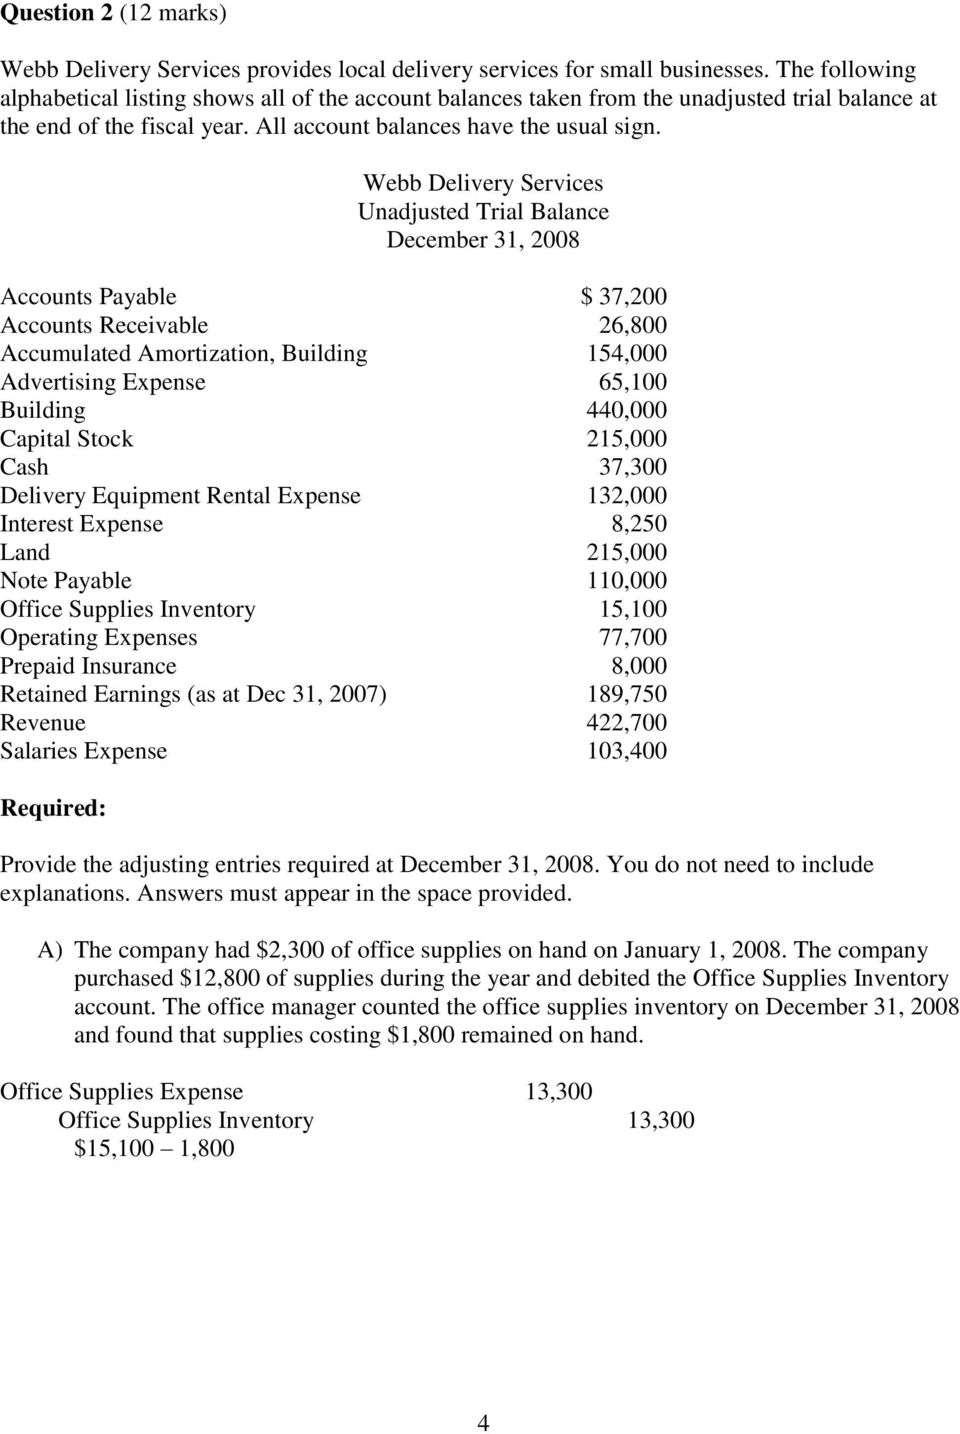 Webb Delivery Services Unadjusted Trial Balance December 31, 2008 Accounts Payable $ 37,200 Accounts Receivable 26,800 Accumulated Amortization, Building 154,000 Advertising Expense 65,100 Building